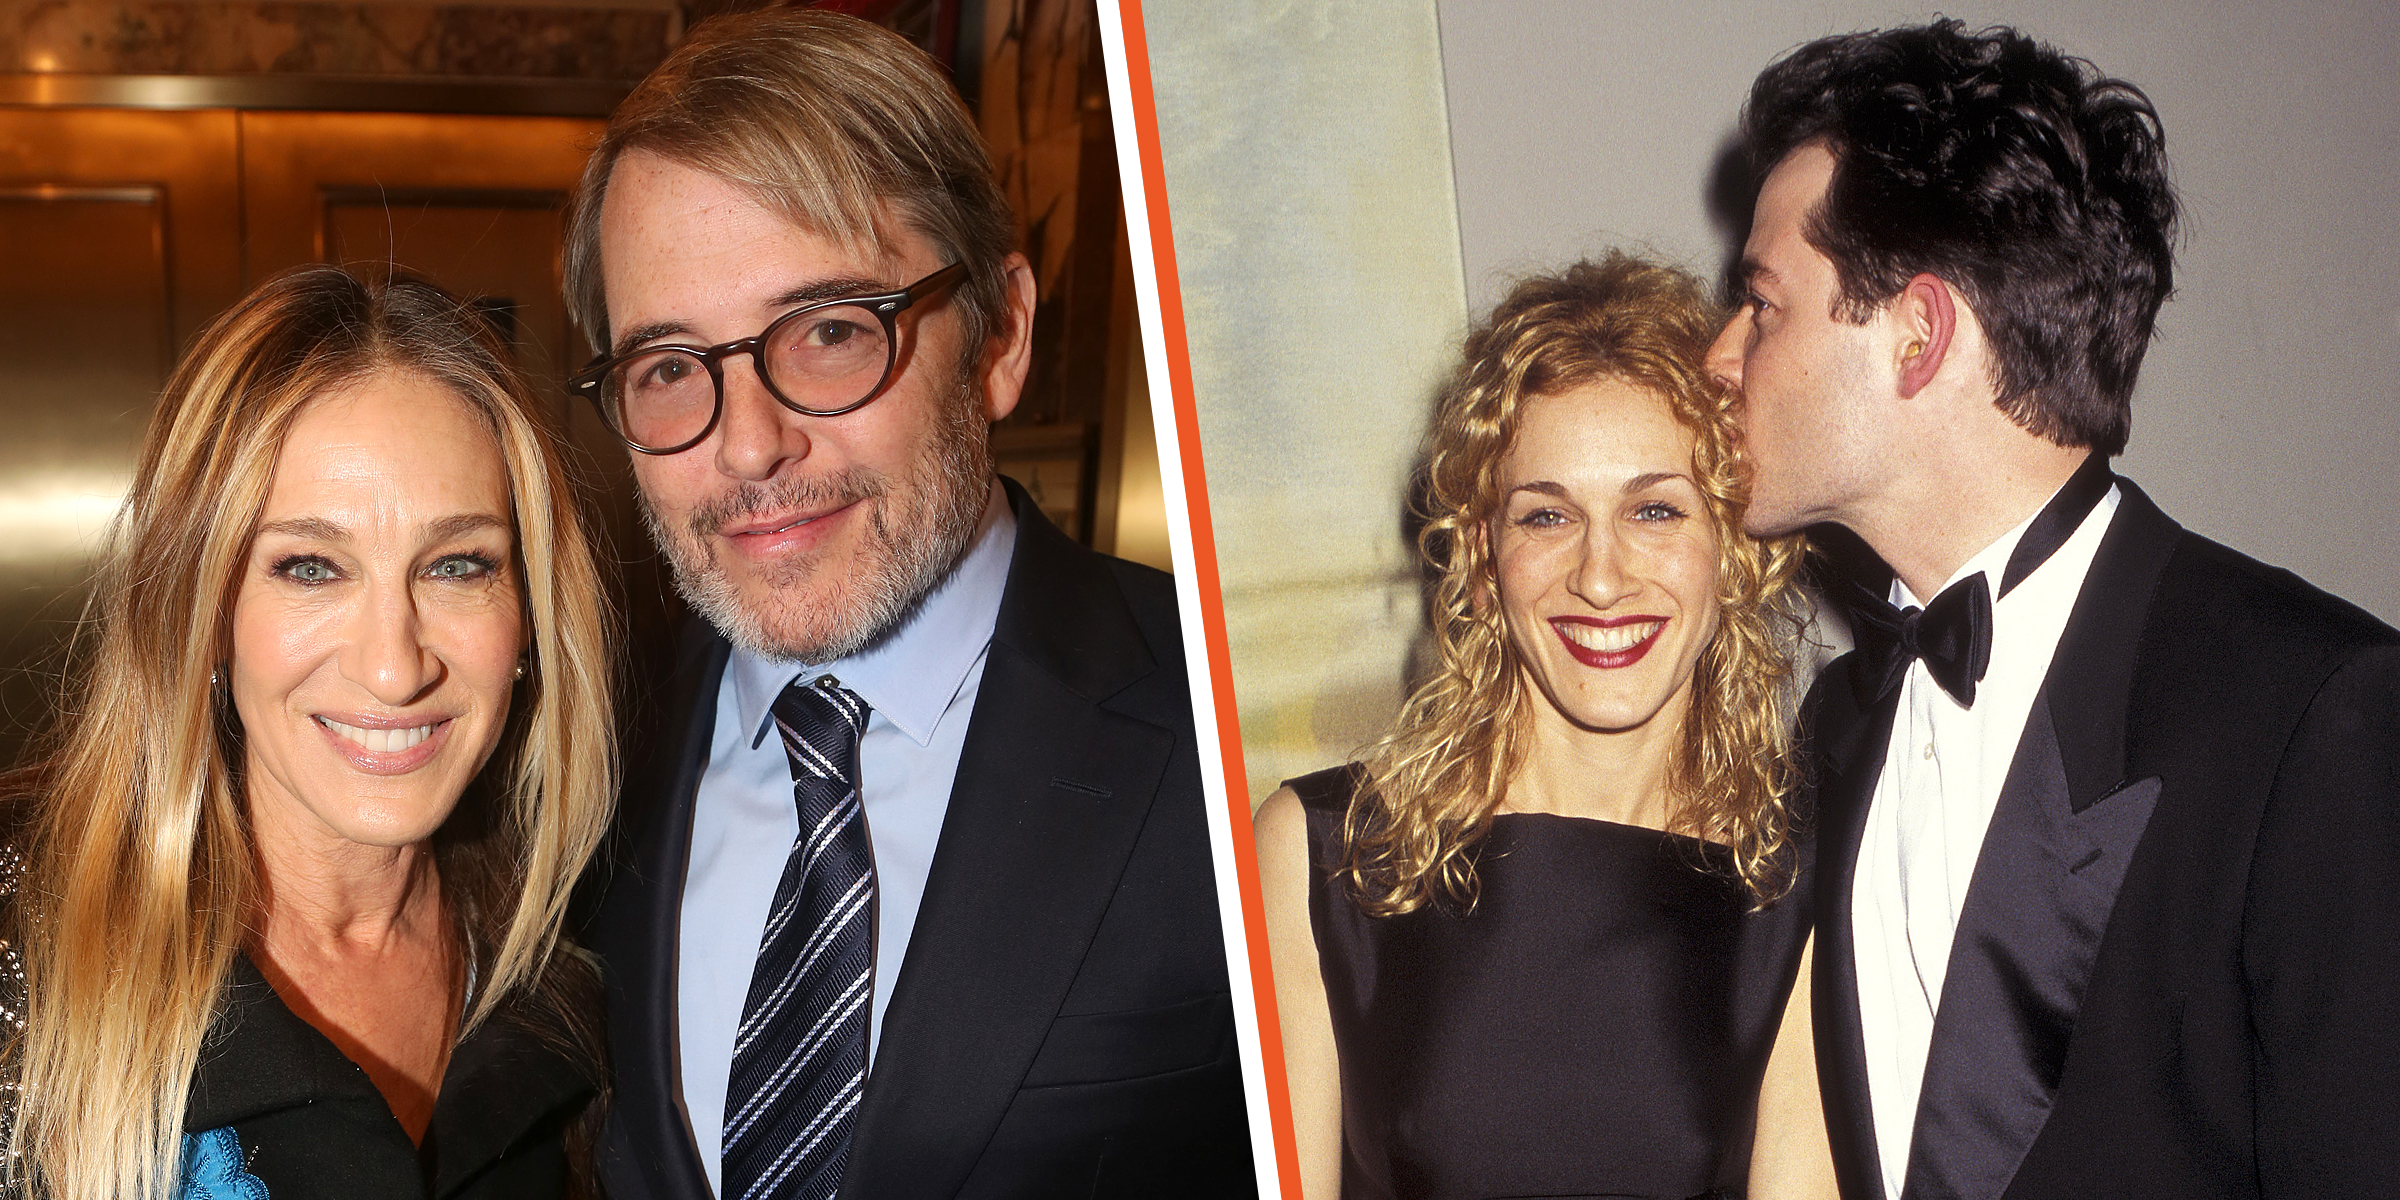 Sarah Jessica Parker and Matthew Broderick | Source: Getty Images